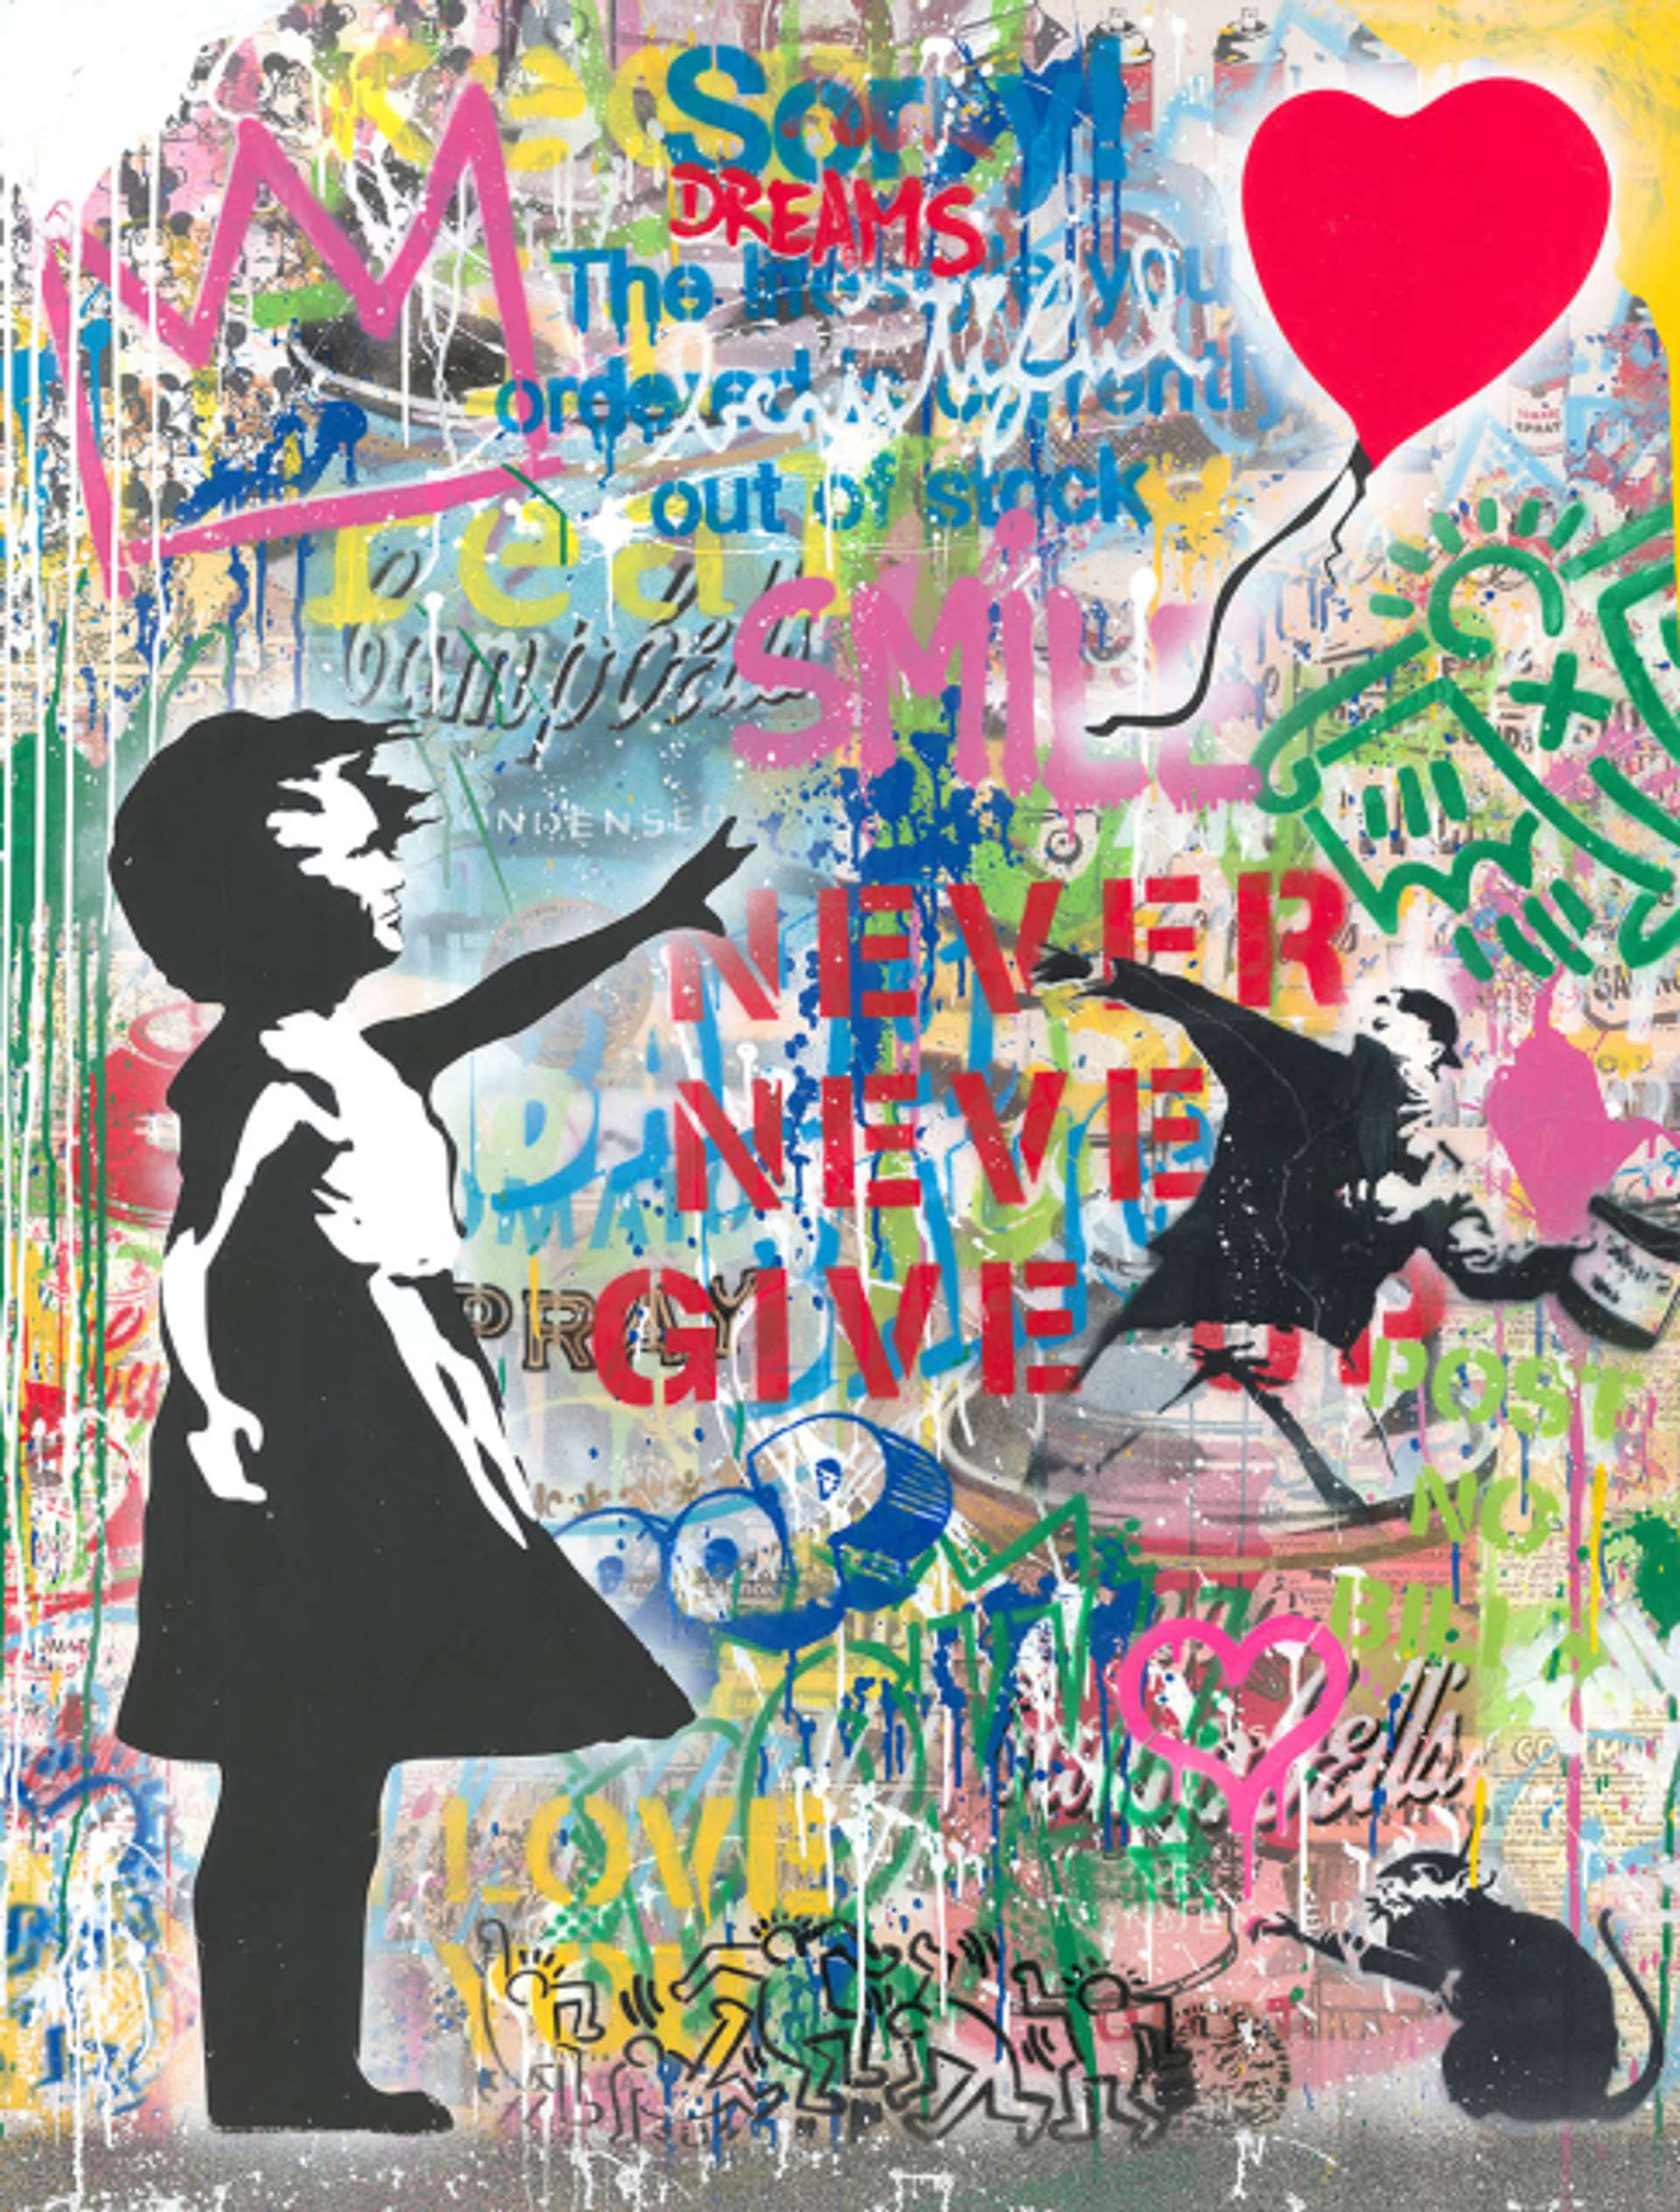 An image of the painting Never Give Up by Mr. Brainwash, showing Banksy’s Girl With Balloon alongside other iconic symbols of contemporary art, including Banksy’s Love Rat, Andy Warhol’s Campbell Soup, Basquiat’s crowns and figures by Keith Haring.